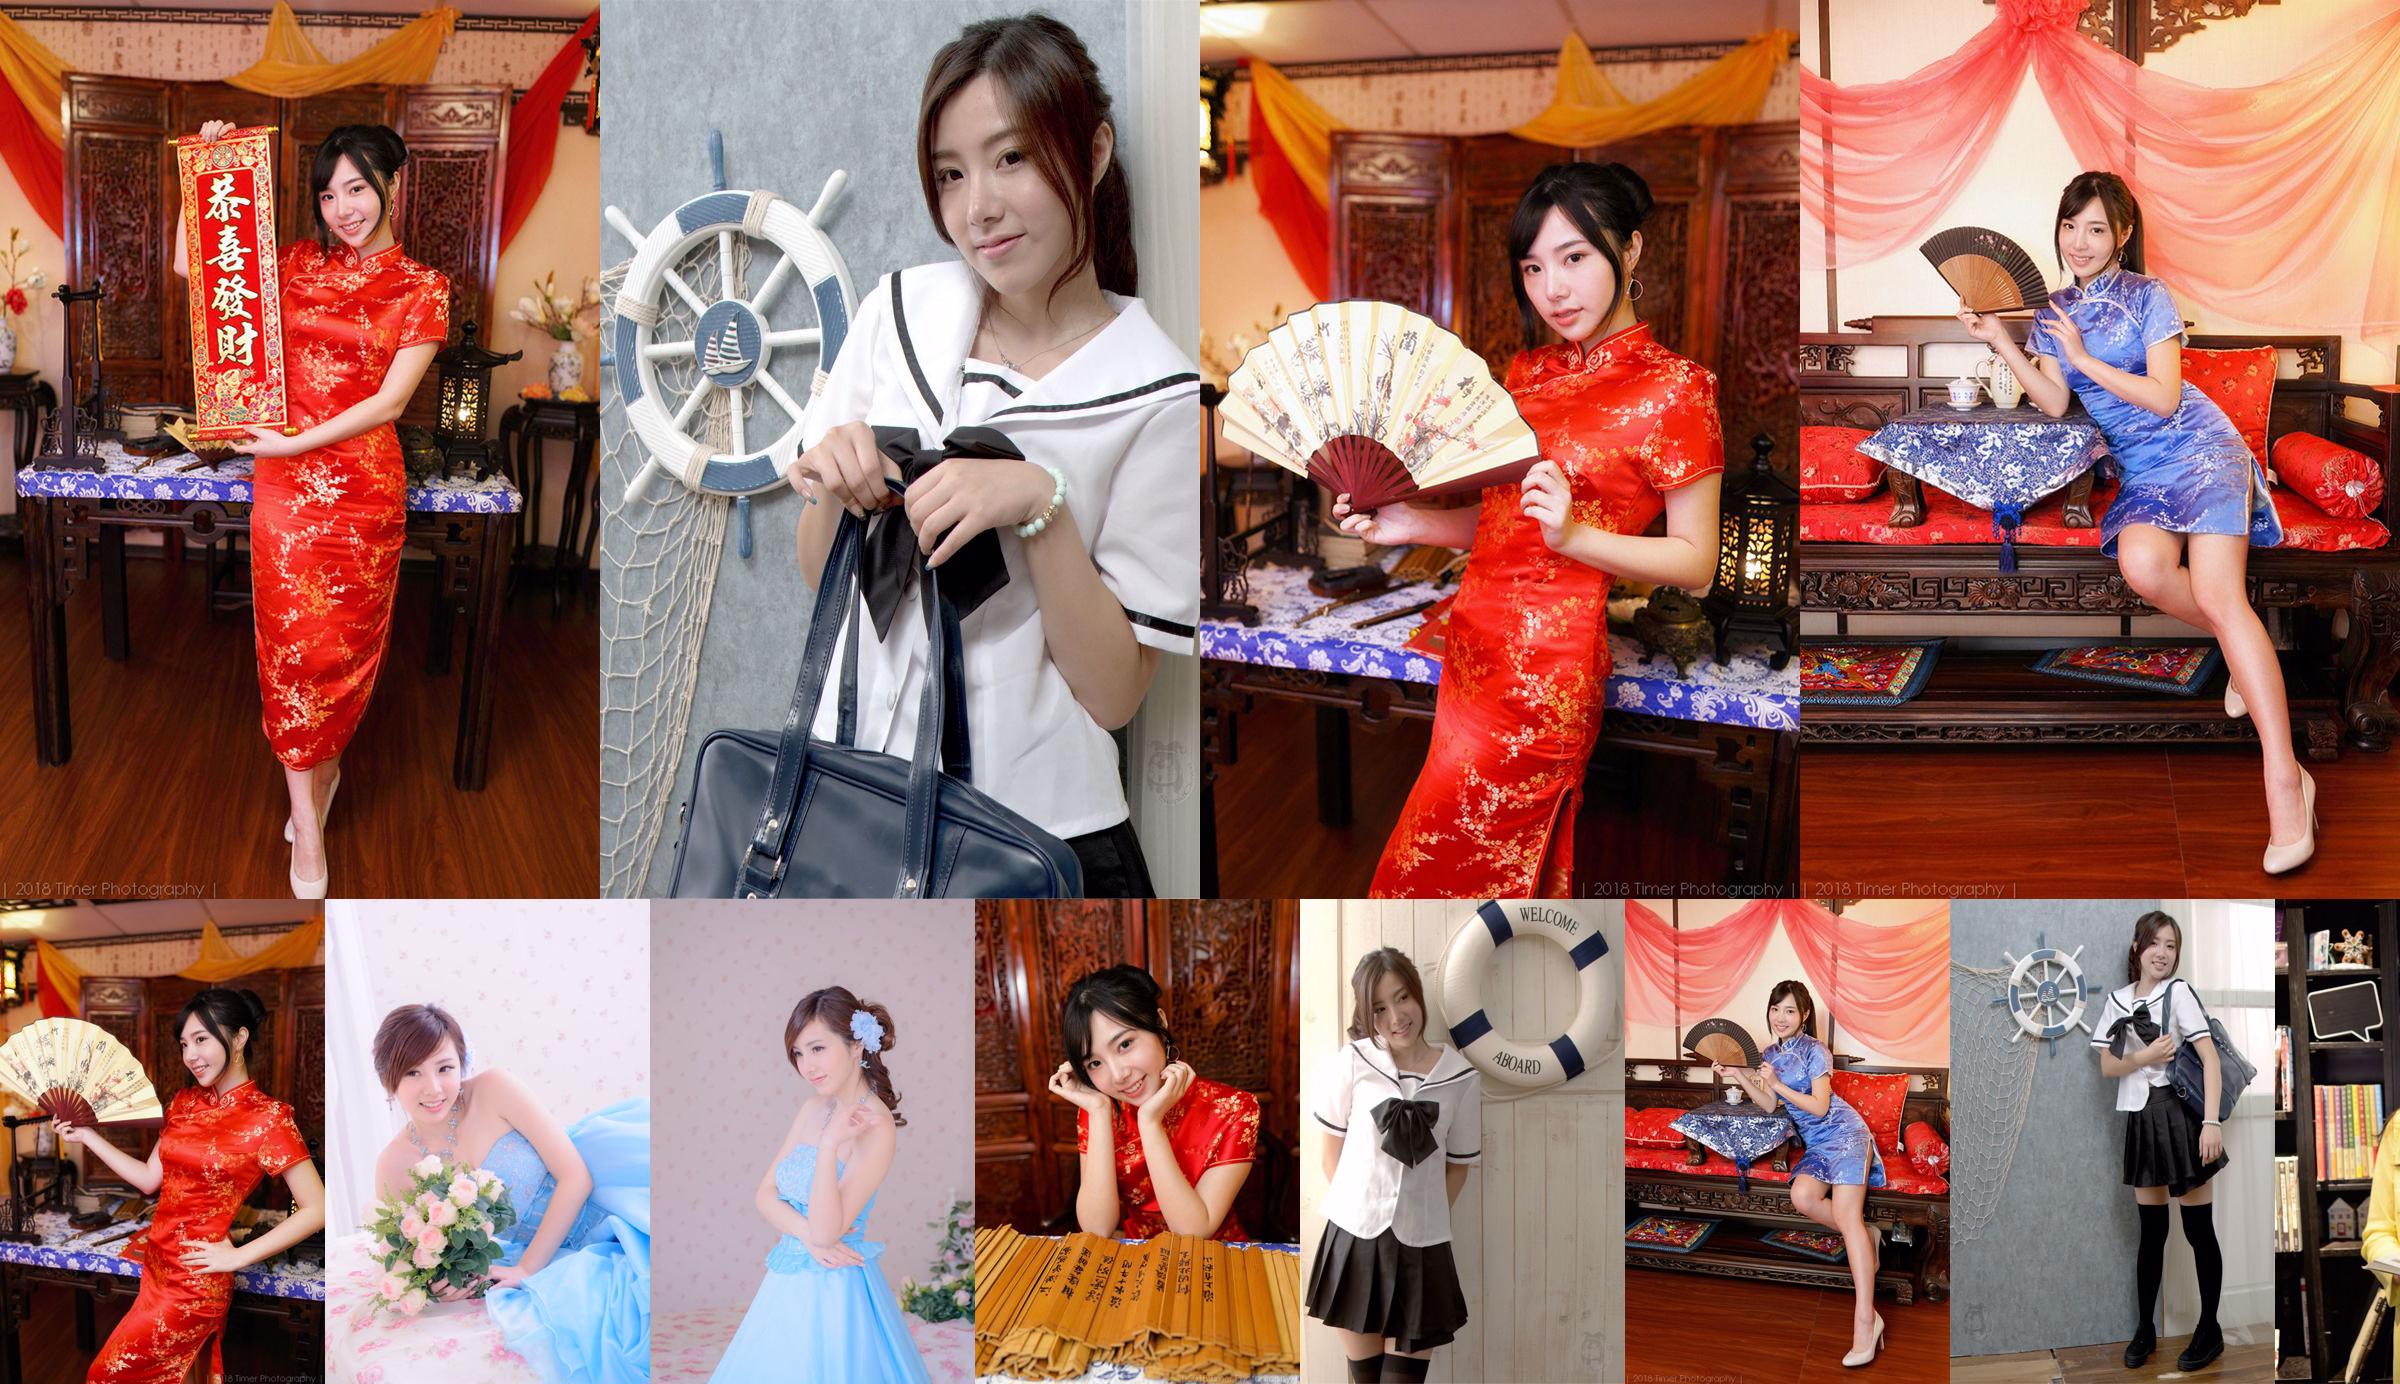 [Taiwan Red Beauty] Zora Chen Siying "Hexi New Year Fashion Studio Shoot" (Partie 2) No.cd117a Page 1